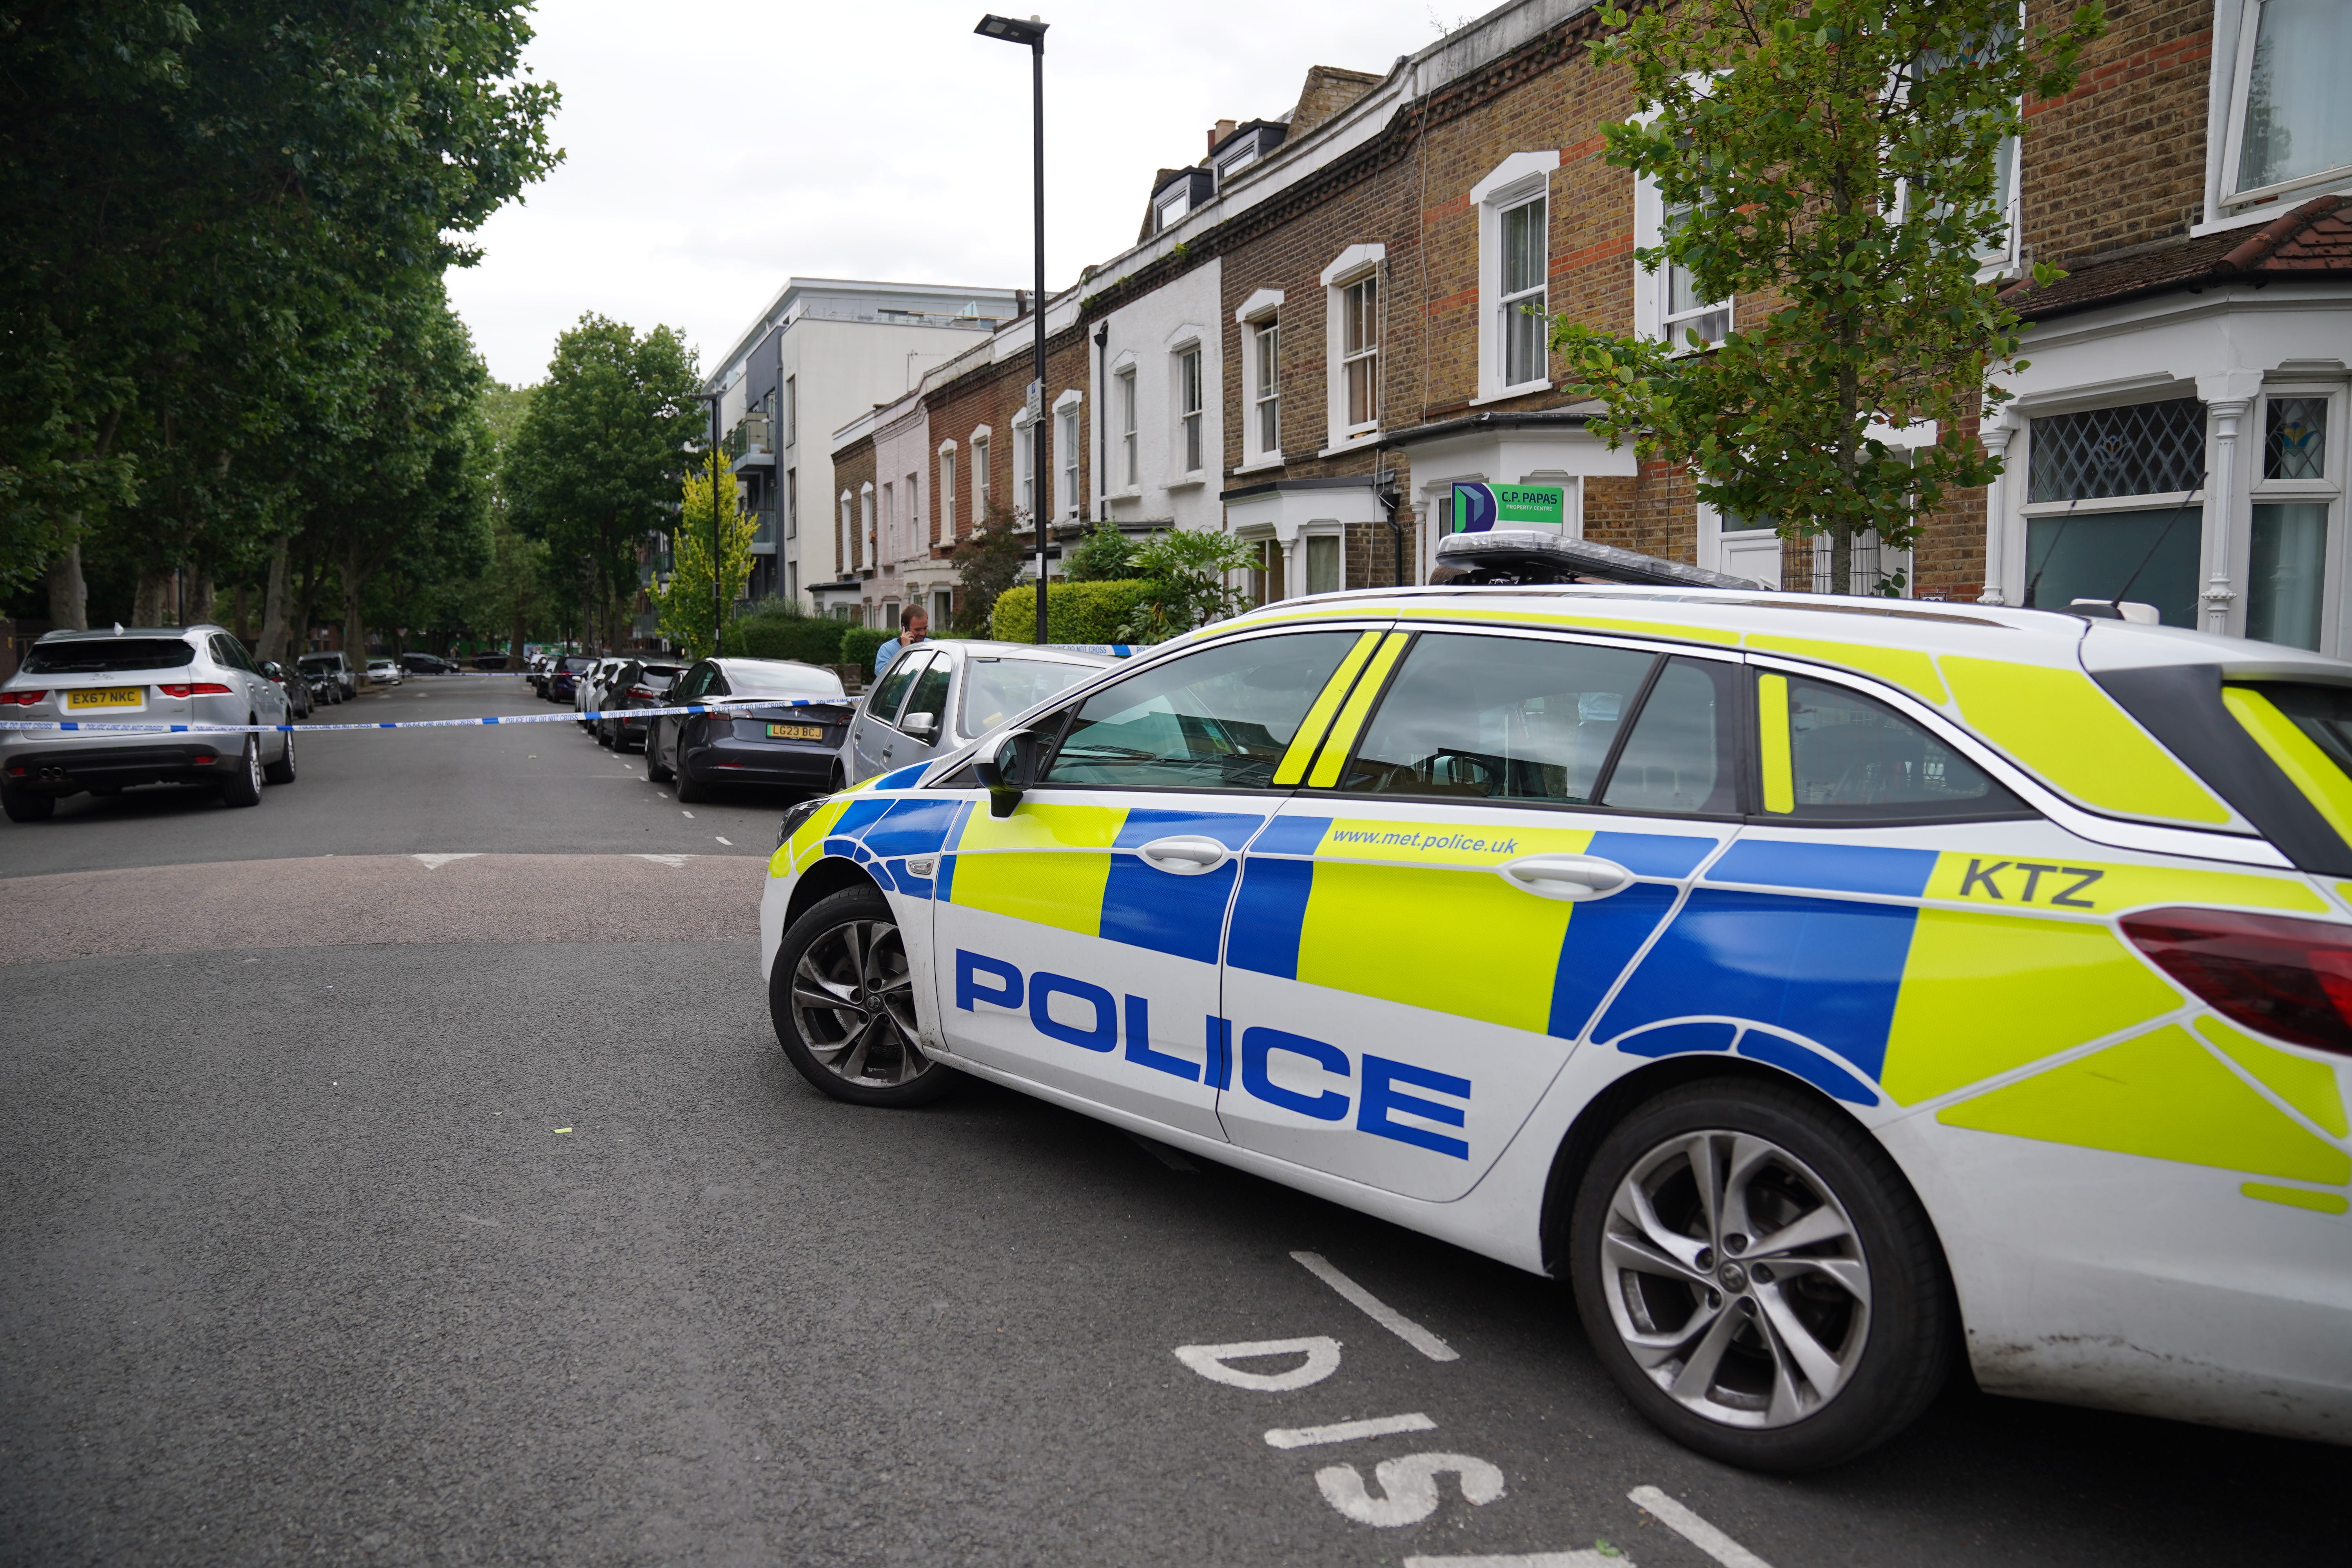 Police were called on Thursday night to reports of a stabbing in Islington (PA)